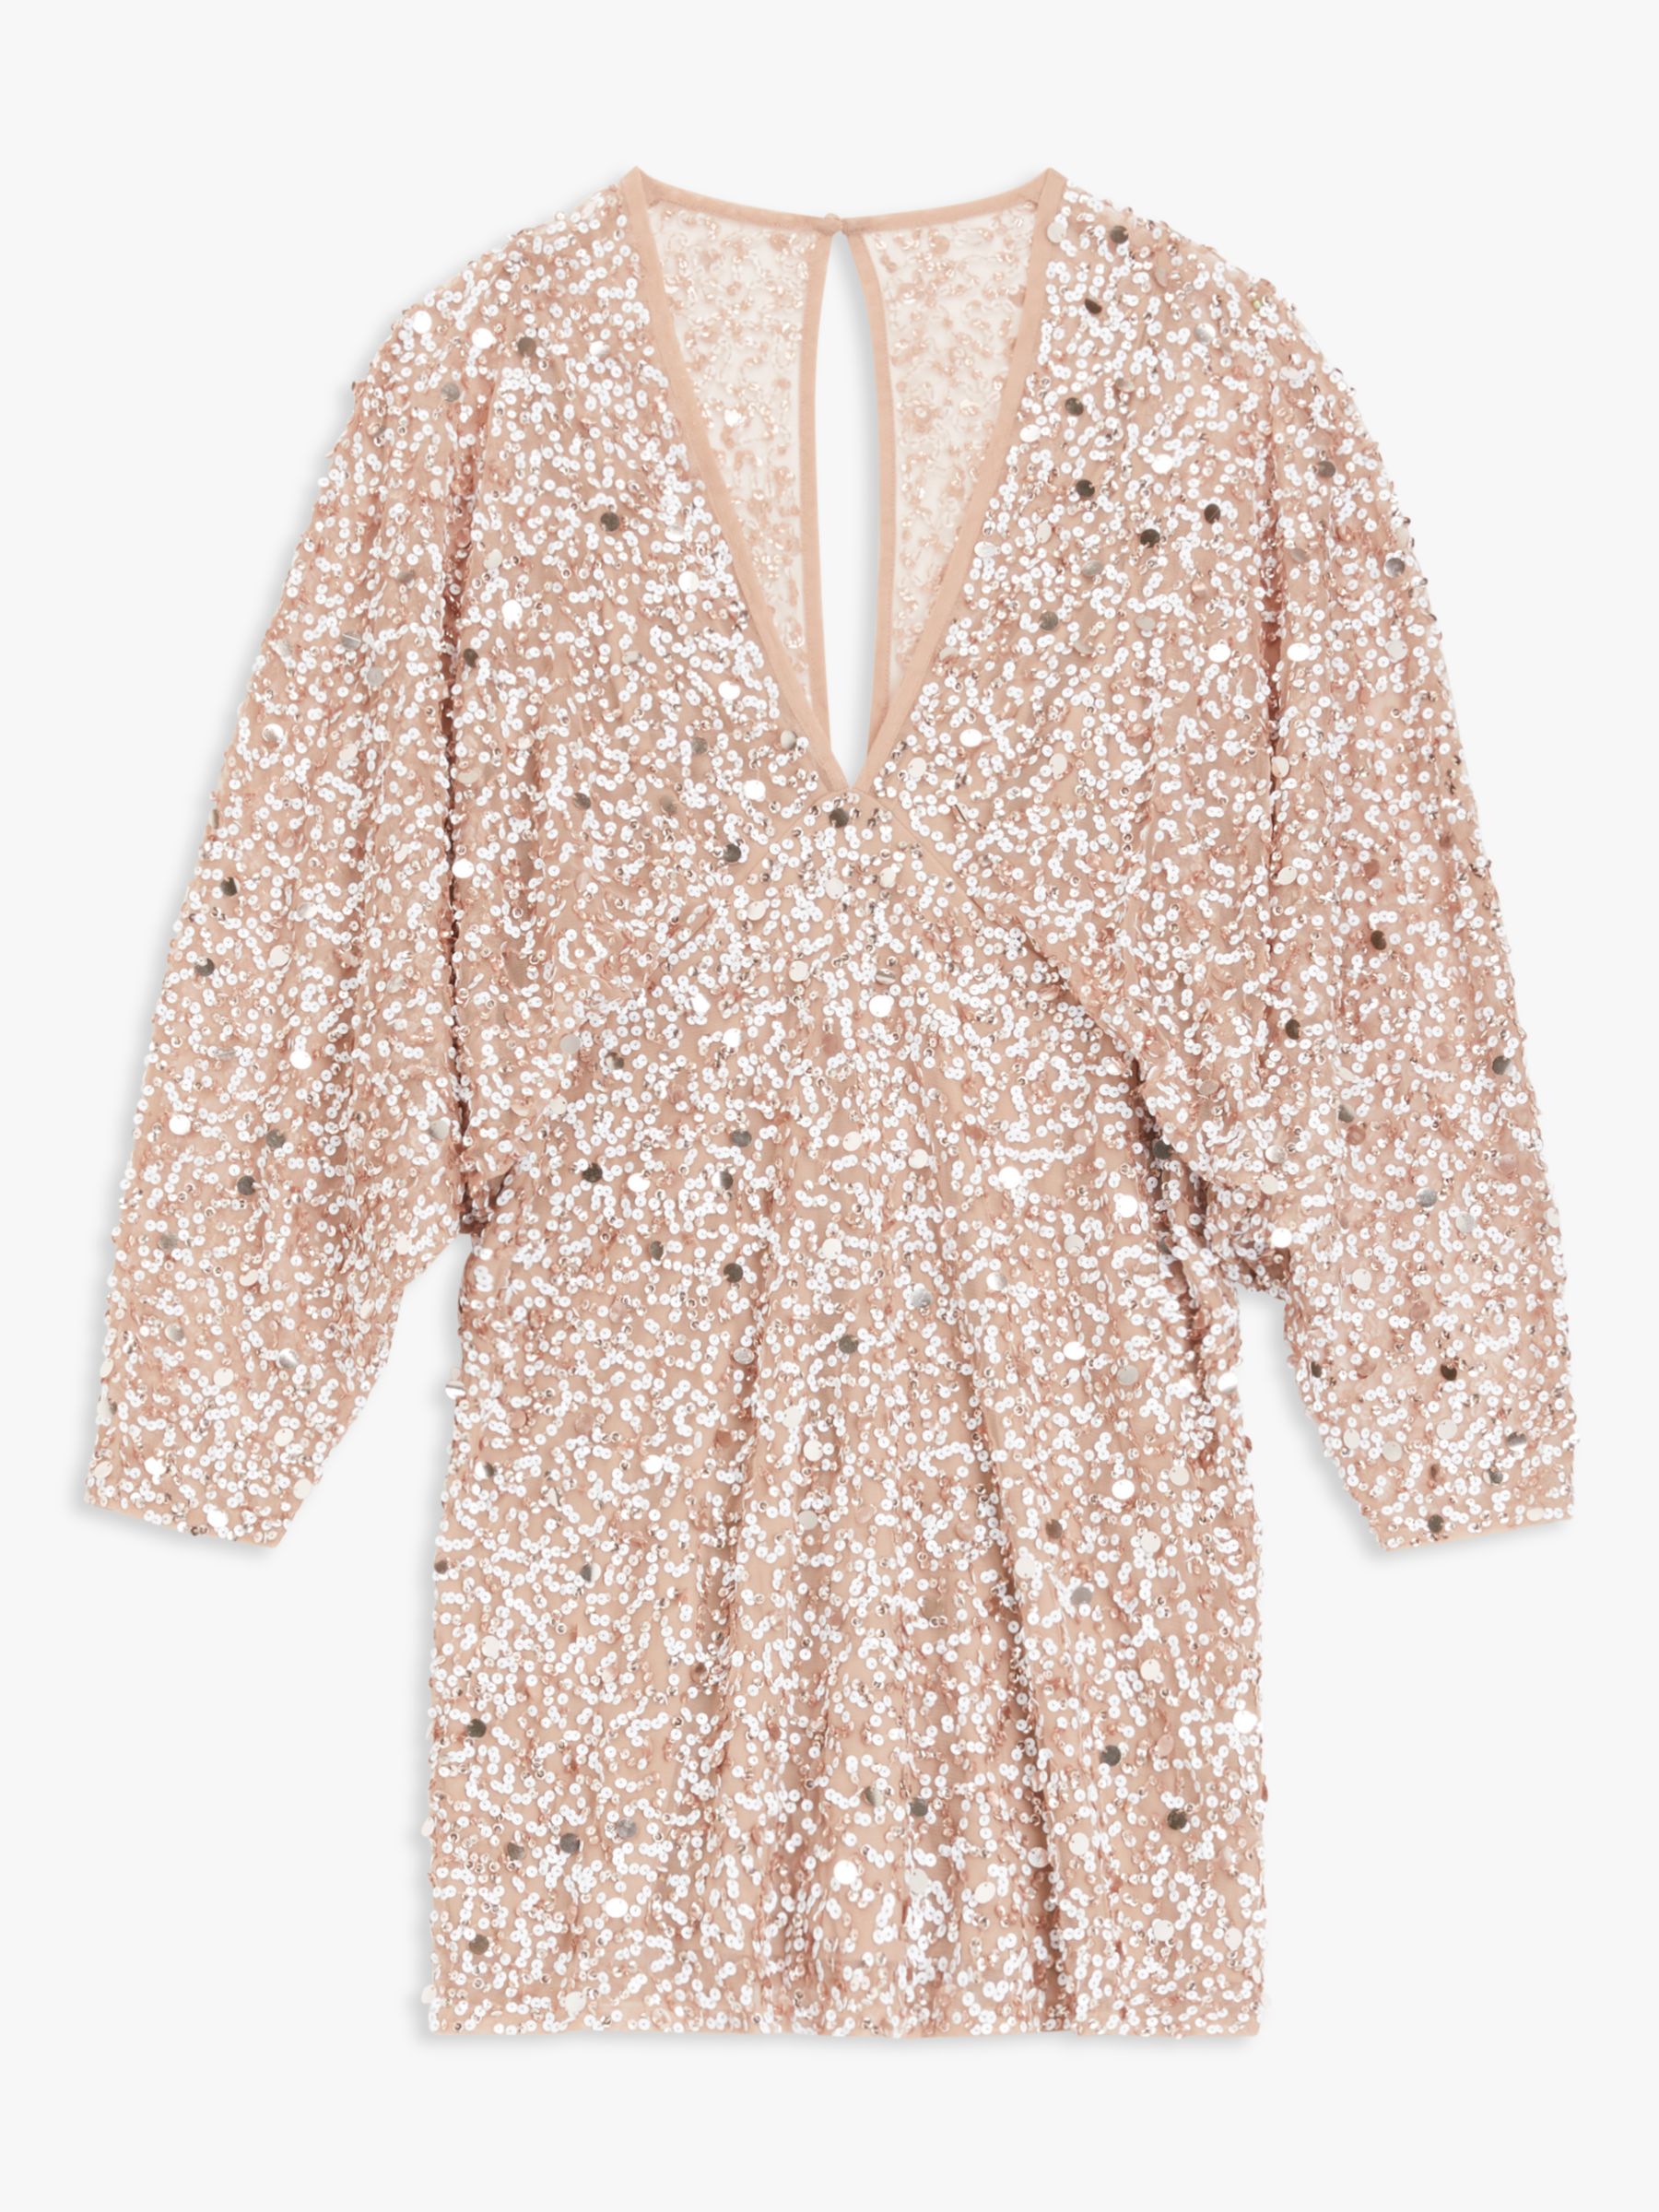 Buy Lace & Beads Astra Sequined Mini Dress, Blush Online at johnlewis.com